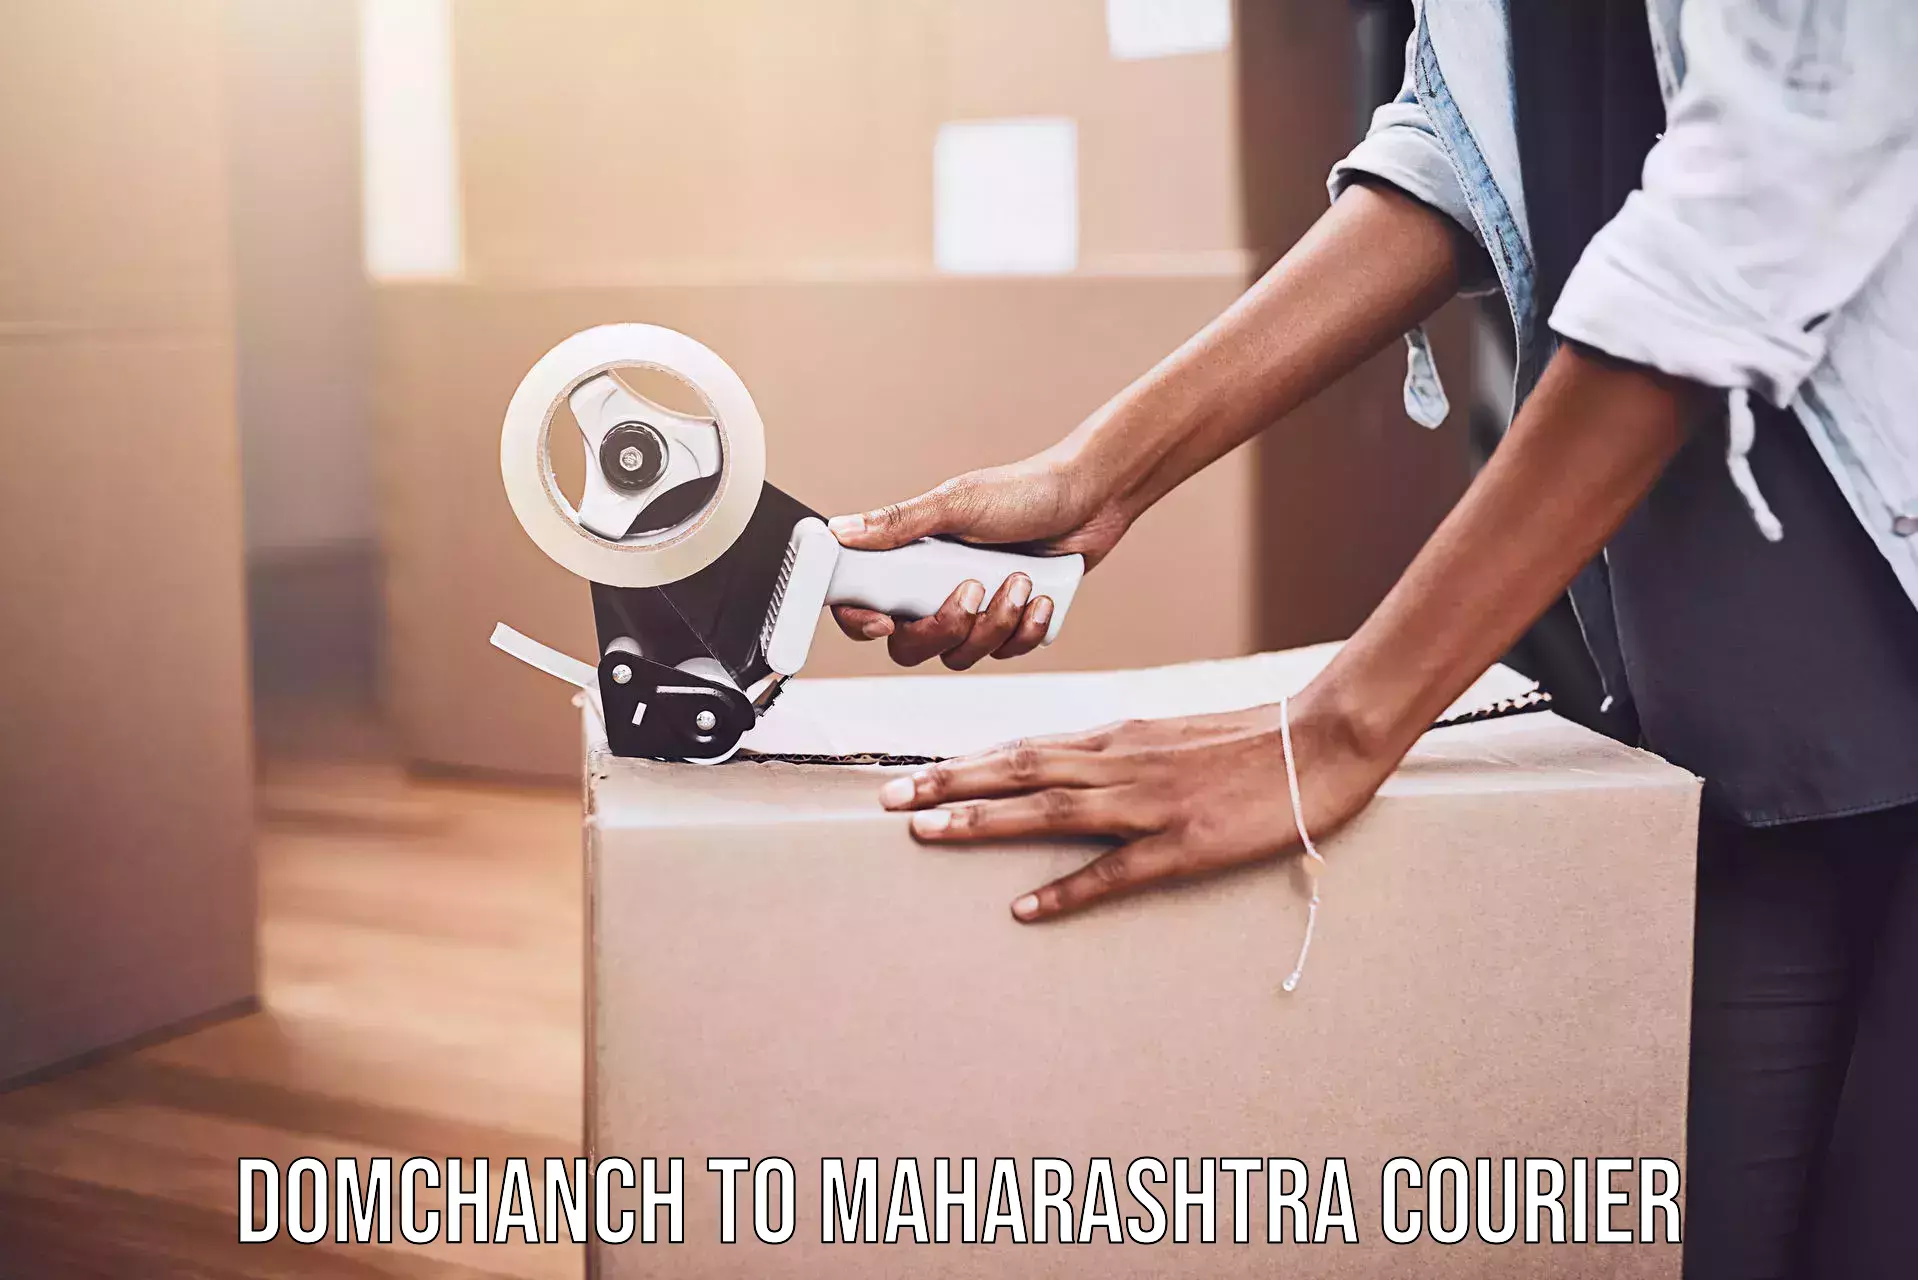 Next-day delivery options Domchanch to Maharashtra